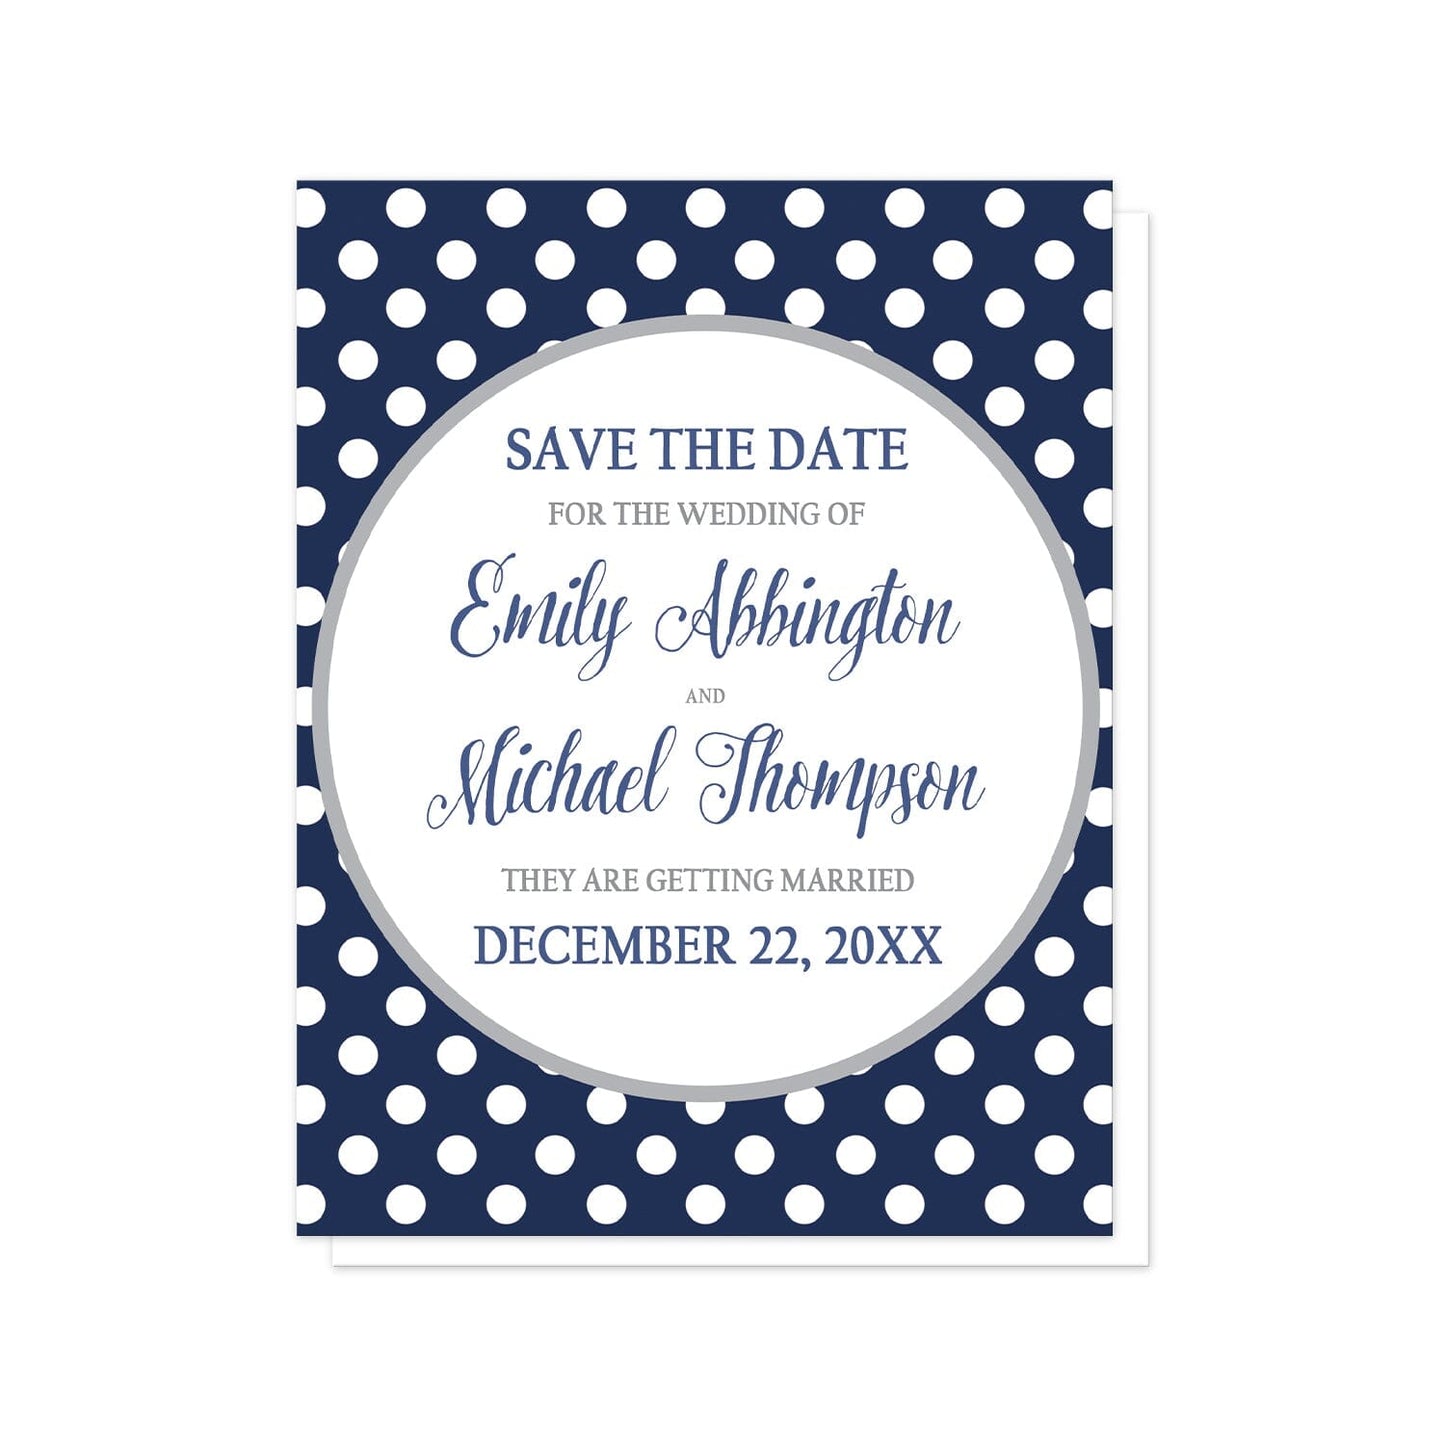 Gray Navy Blue Polka Dot Save the Date Cards at Artistically Invited. Gray navy blue polka dot save the date cards with your personalized wedding date announcement details custom printed in navy blue and gray inside a white circle outlined in light gray, over a navy blue polka dot pattern with white polka dots over blue.